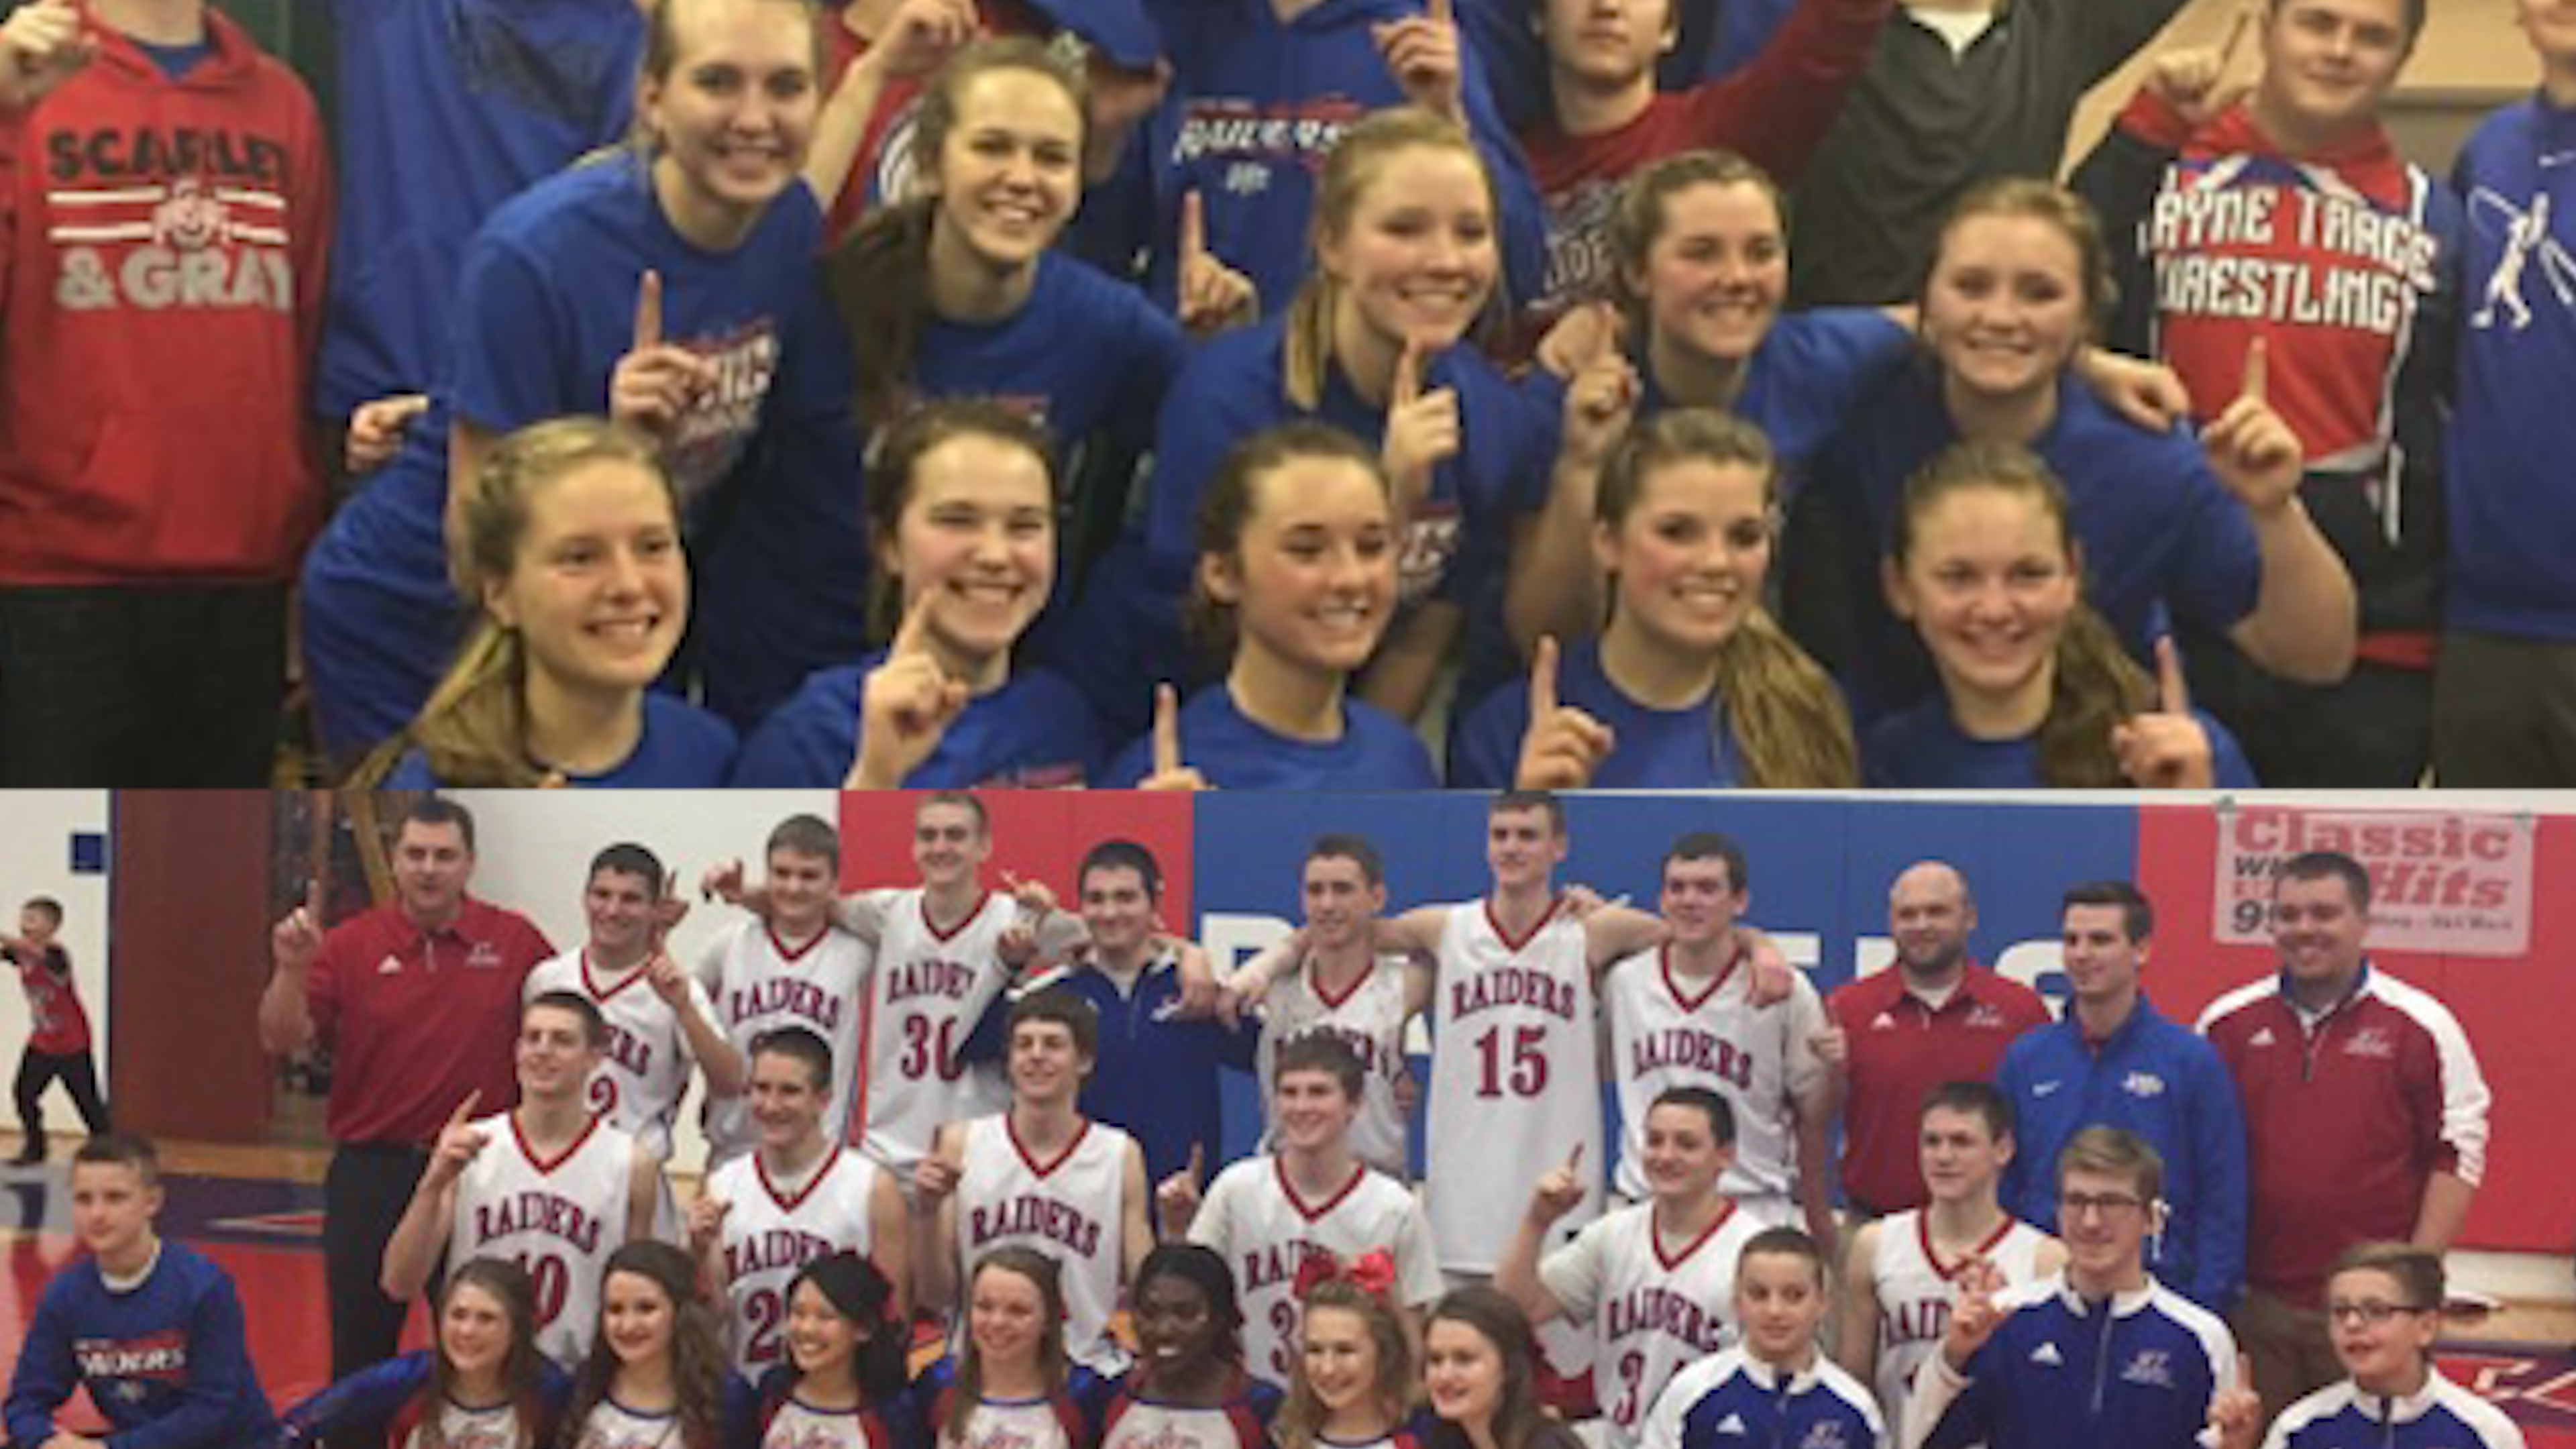 Wayne Trace boys & girls hoops win conference crowns in same season for 1st time